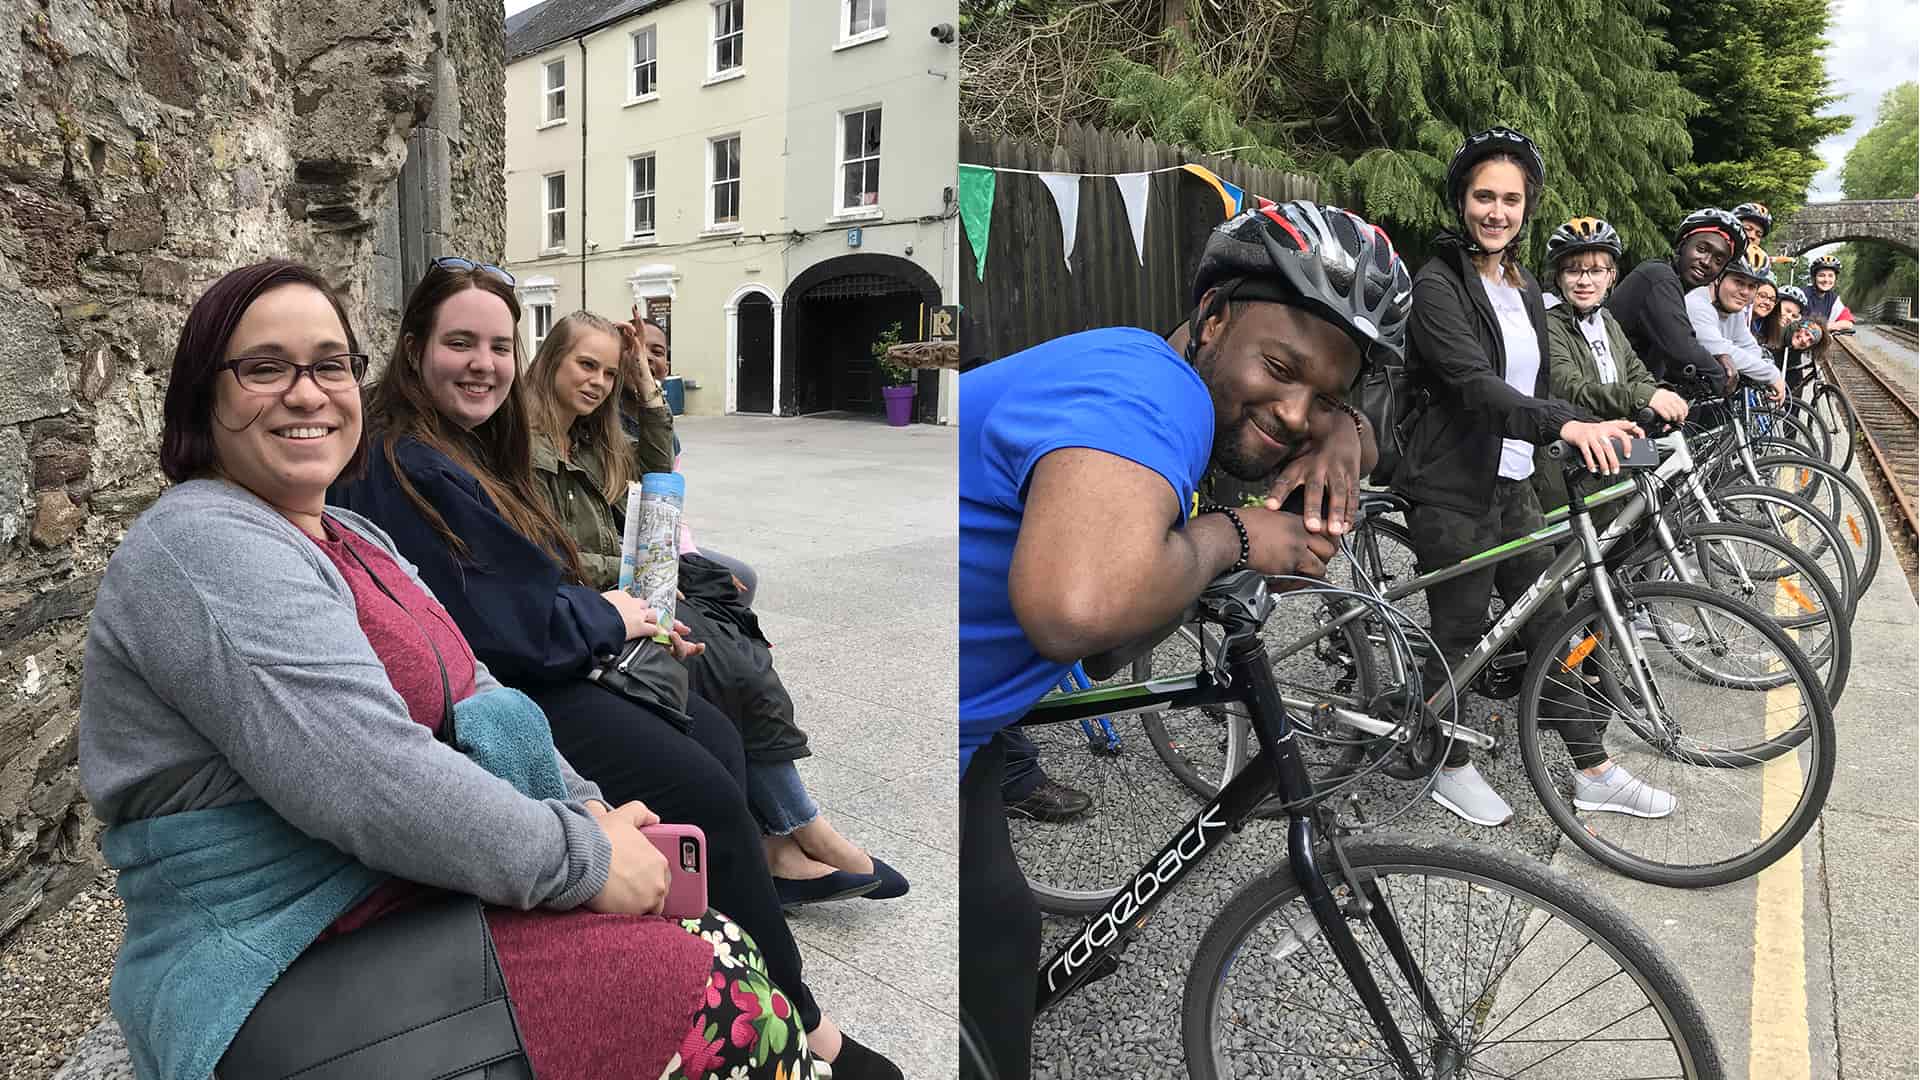 Students on bikes and visiting historic sites in Ireland